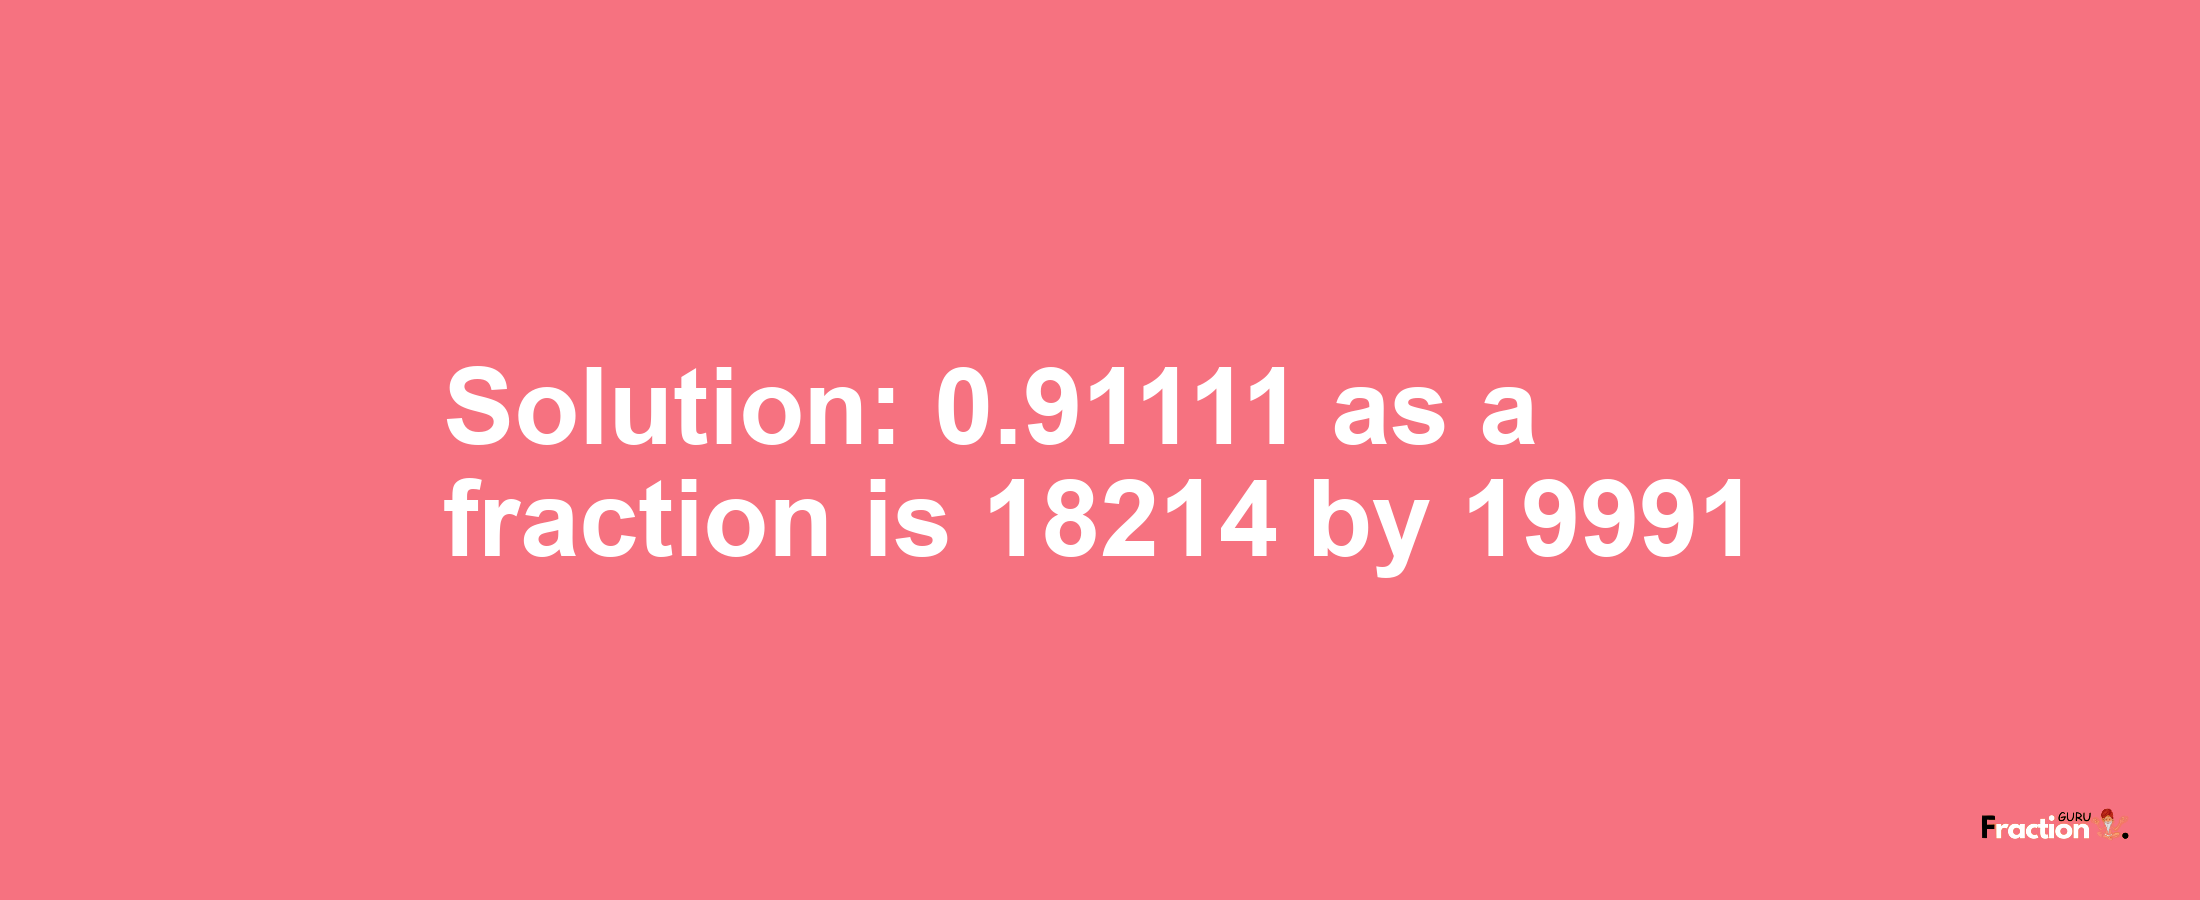 Solution:0.91111 as a fraction is 18214/19991